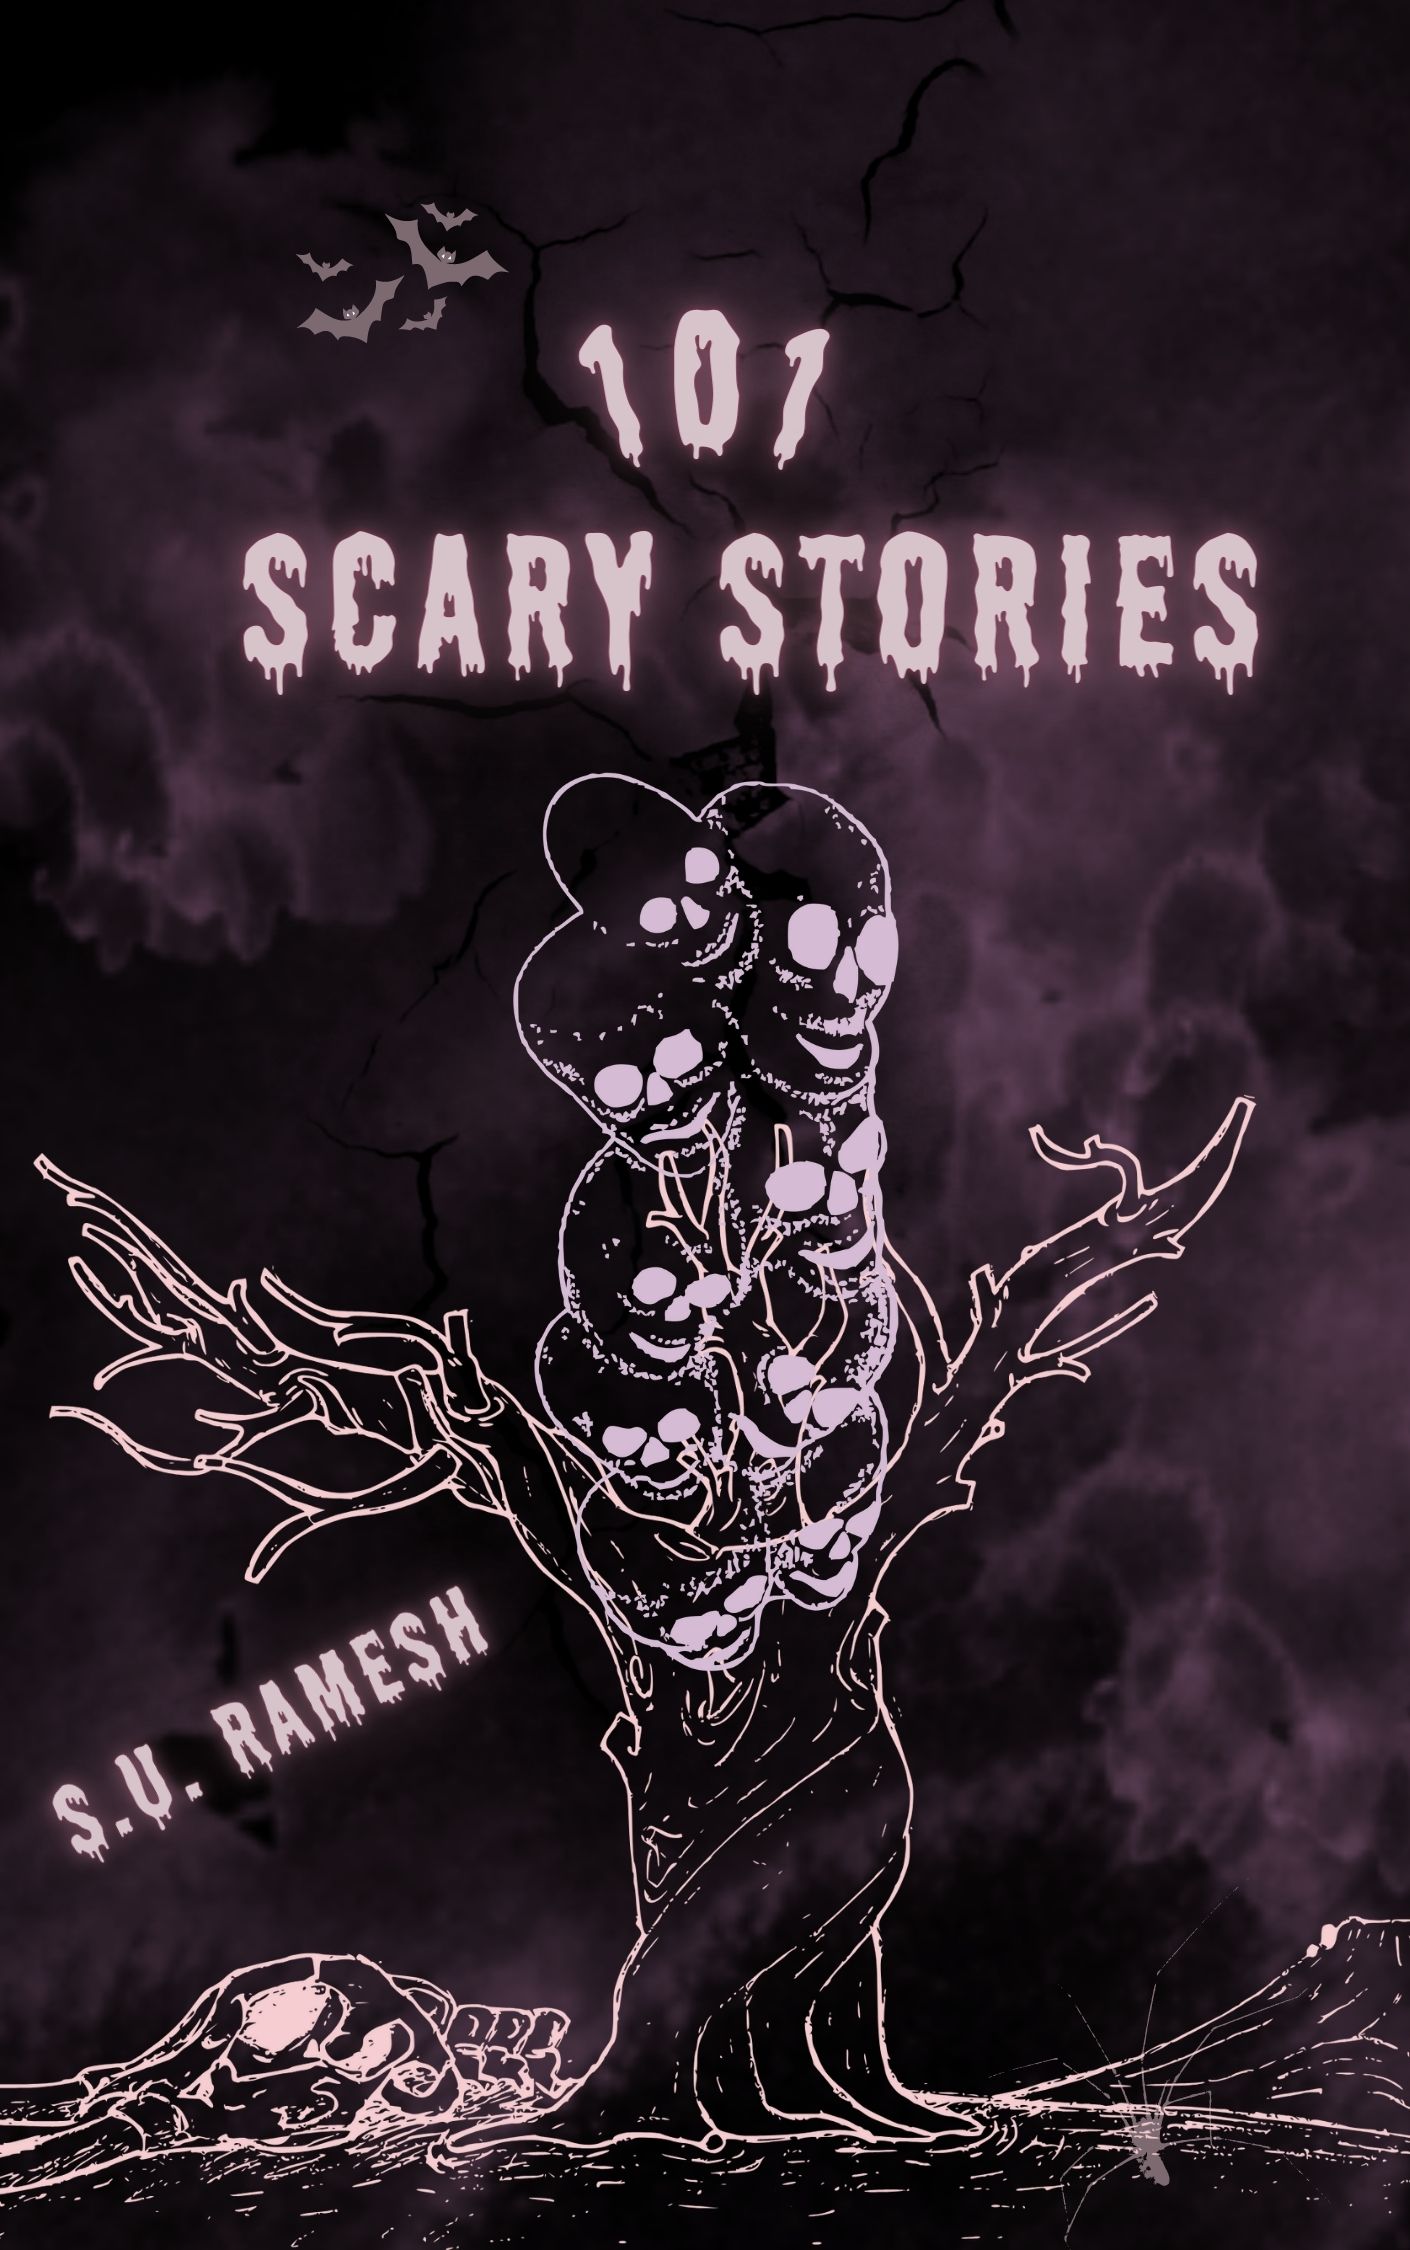 101 Scary Stories